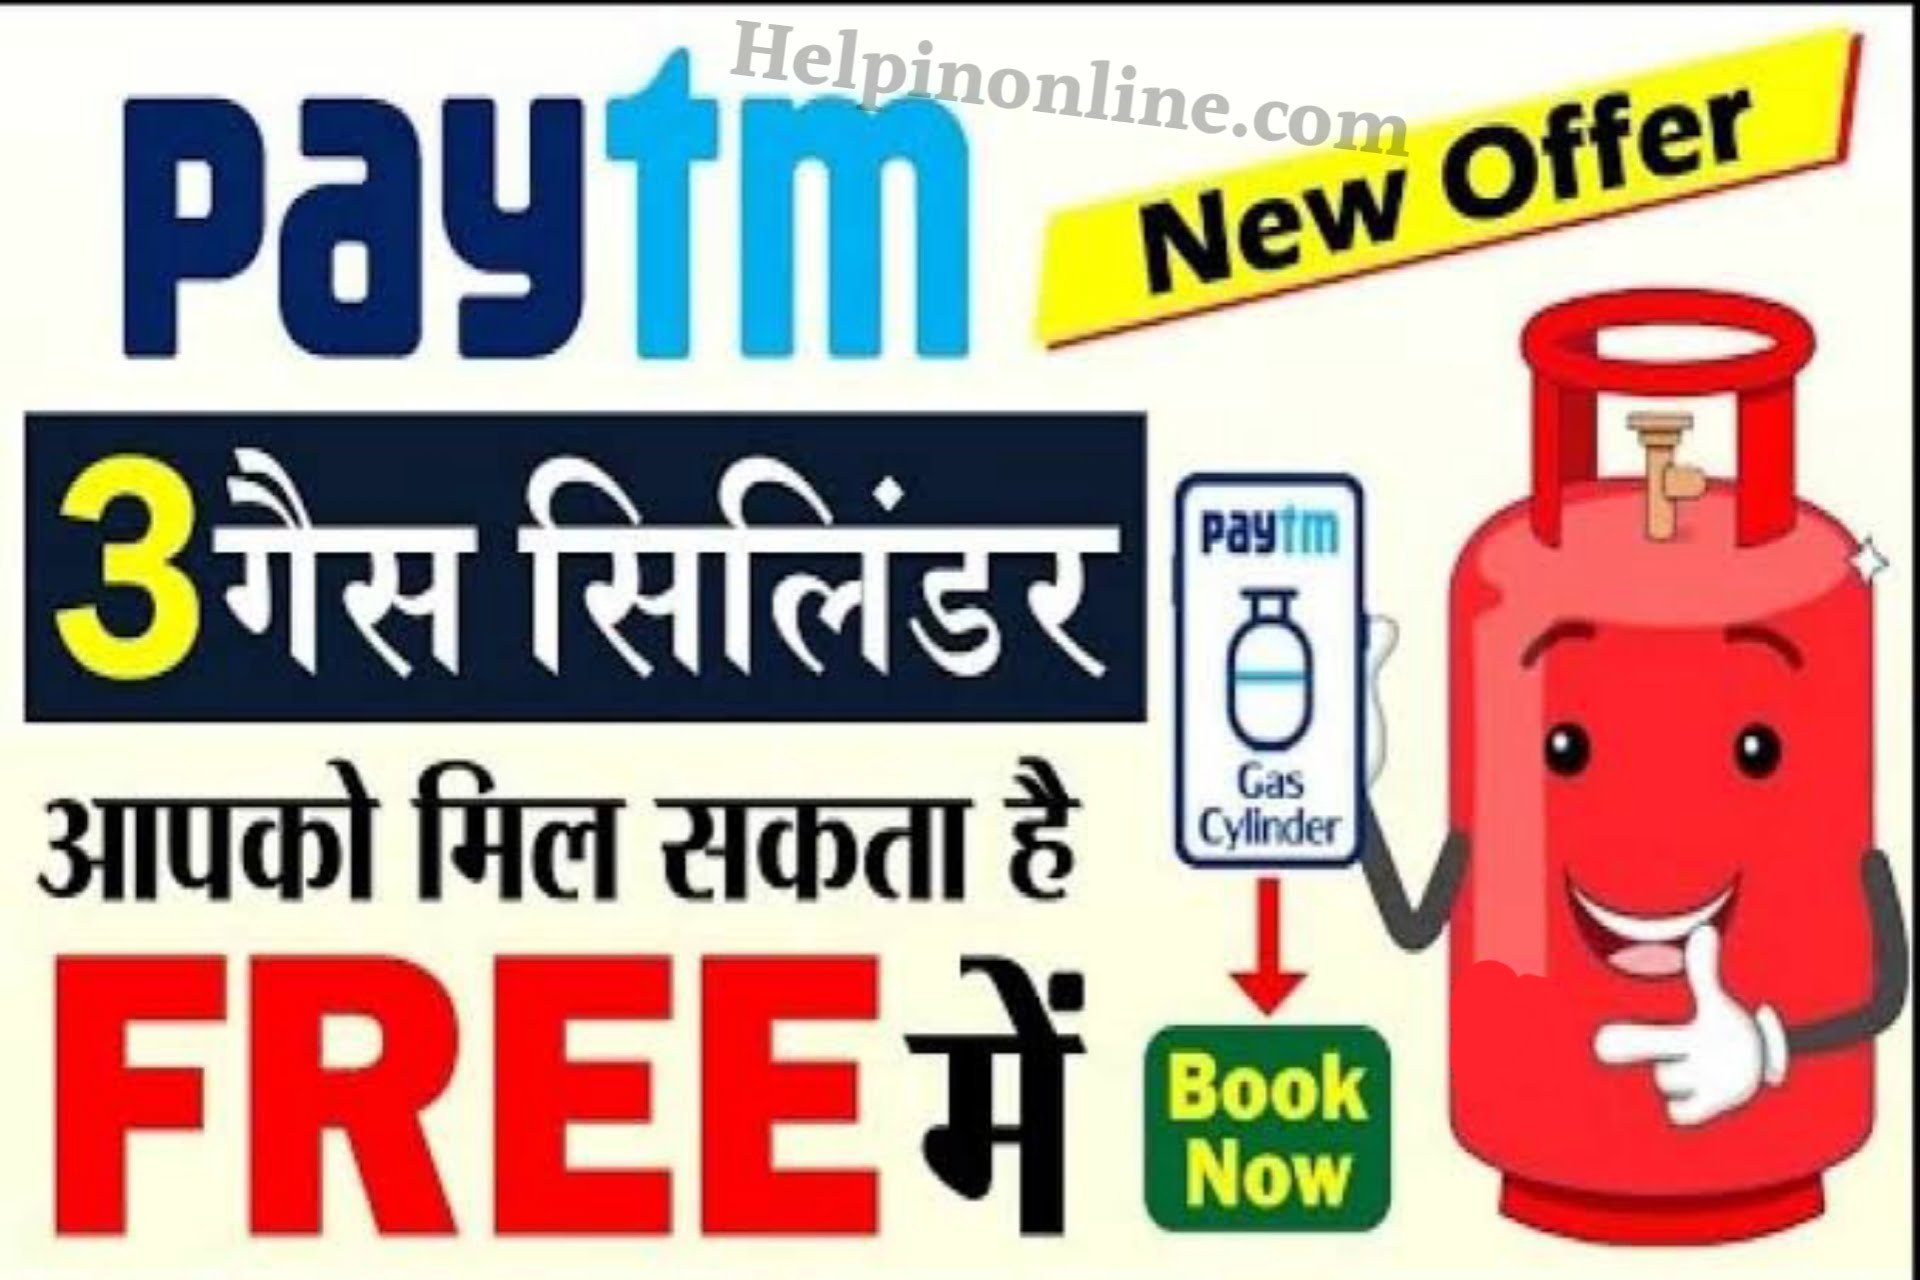 LPG GAS Cylinder Offer 2022 , lpg gas cylinder price , lpg gas cylinder price hike , lpg gas cylinder , lpg gas cylinder price today , lpg price today bihar , lpg price in patna today